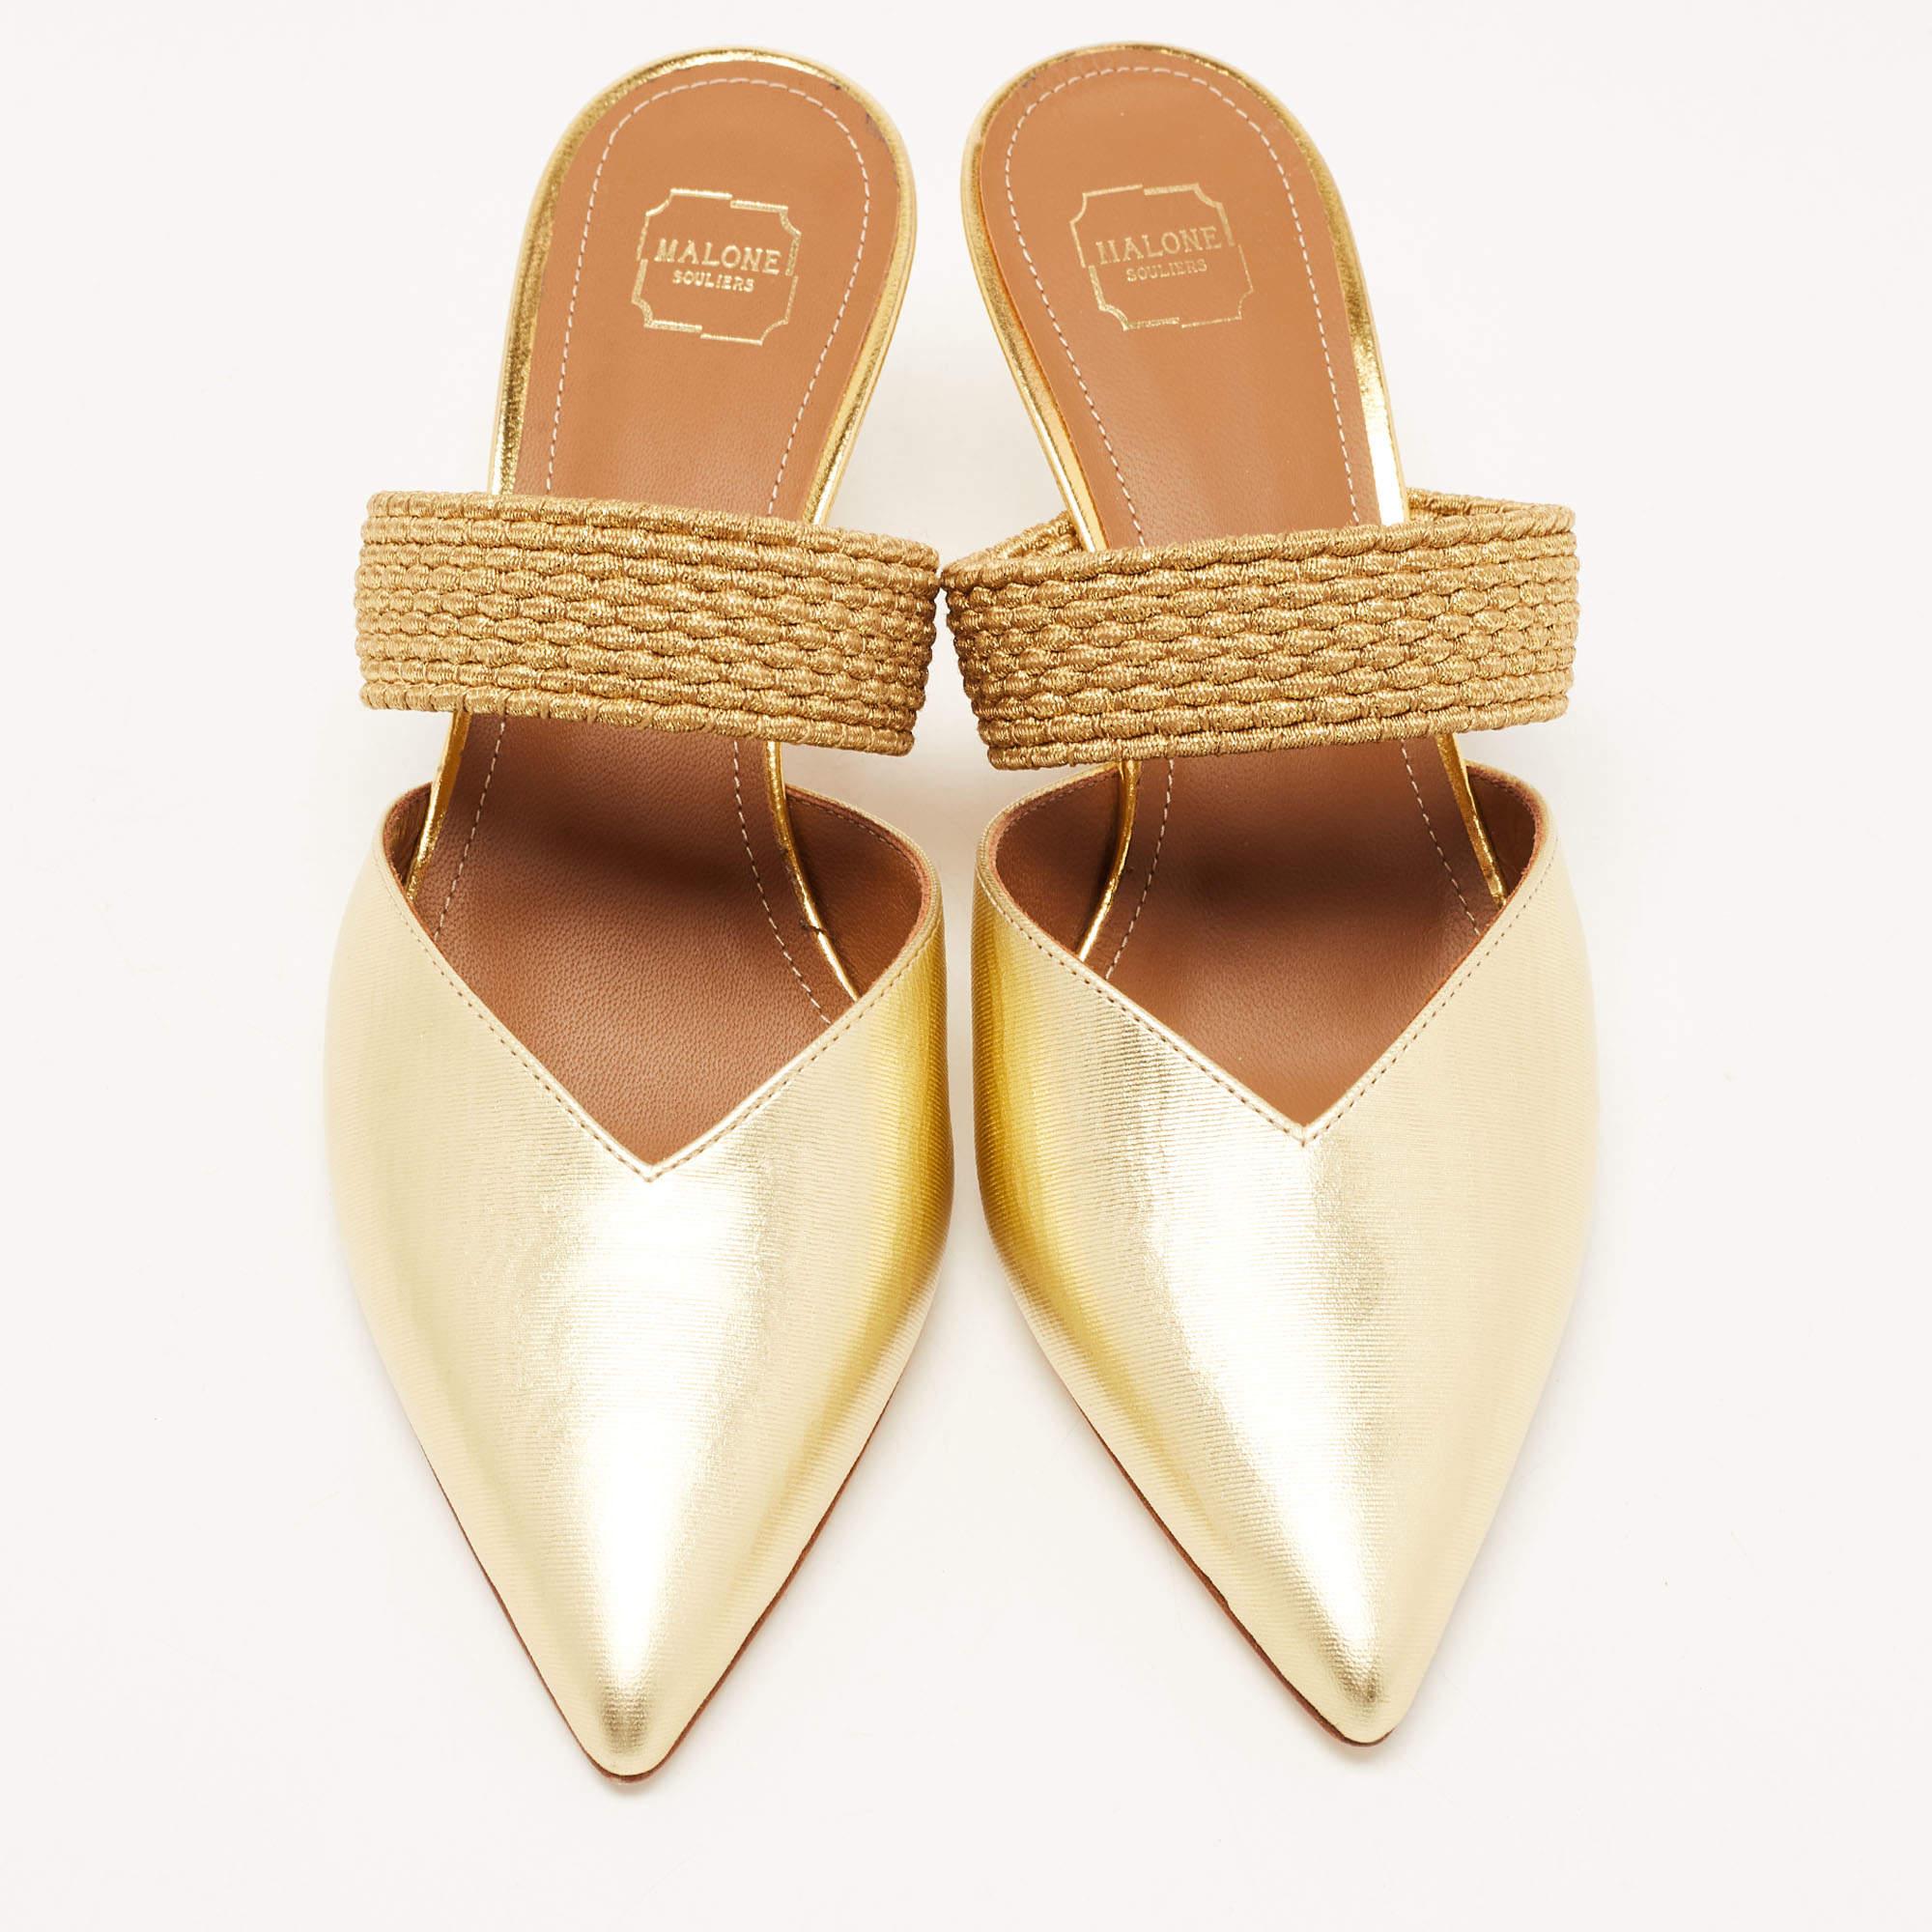 The sleek pointed-toe silhouette of Malone Souliers’ Maisie mules lends them a chic and feminine tone. They feature a broad woven strap, leather exterior and sit on kitten heels. Wear them with a simple midi dress for a casual lunch date.

Includes: